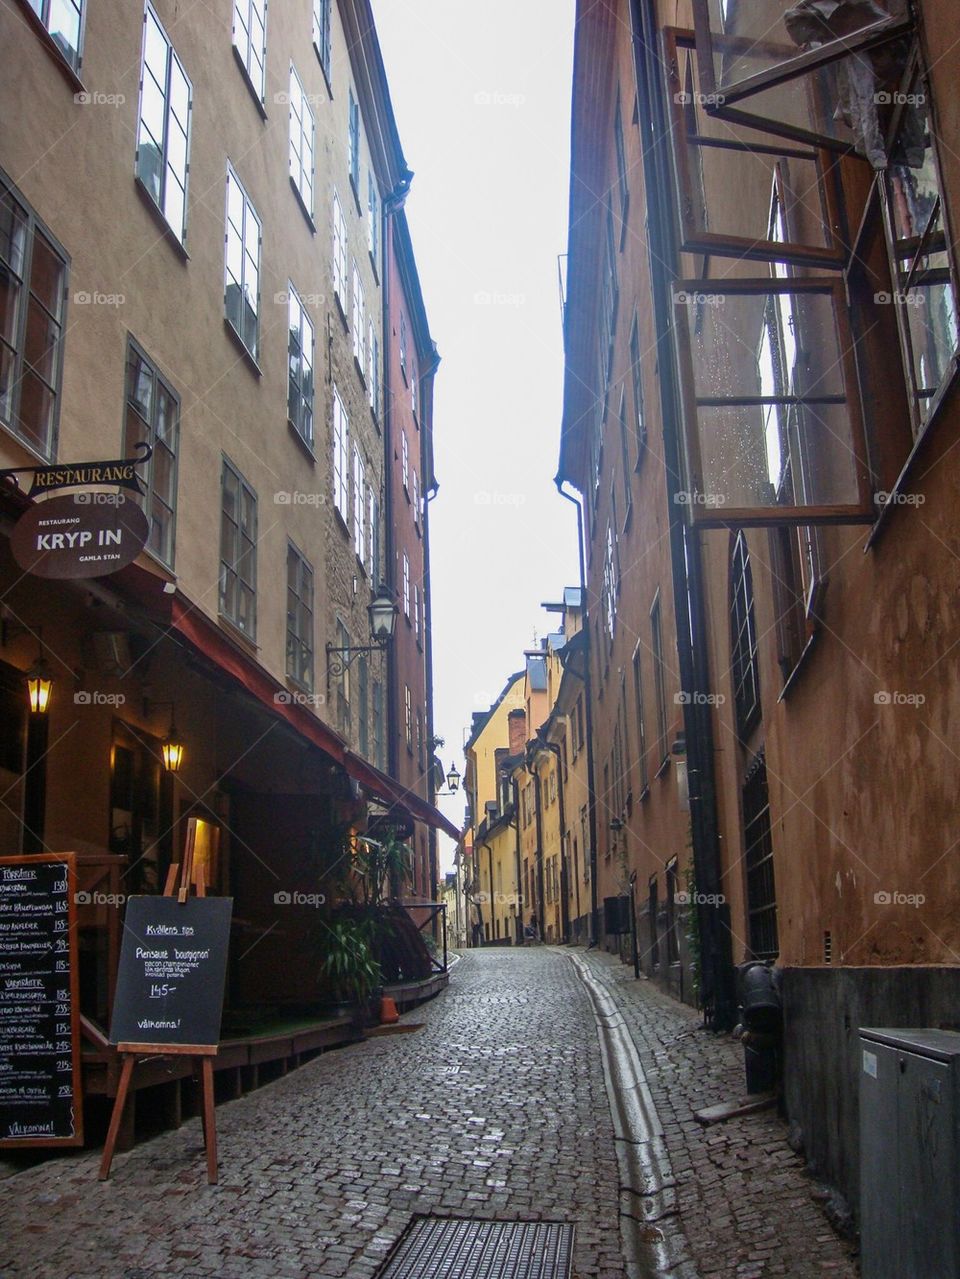 The old town in Stockholm